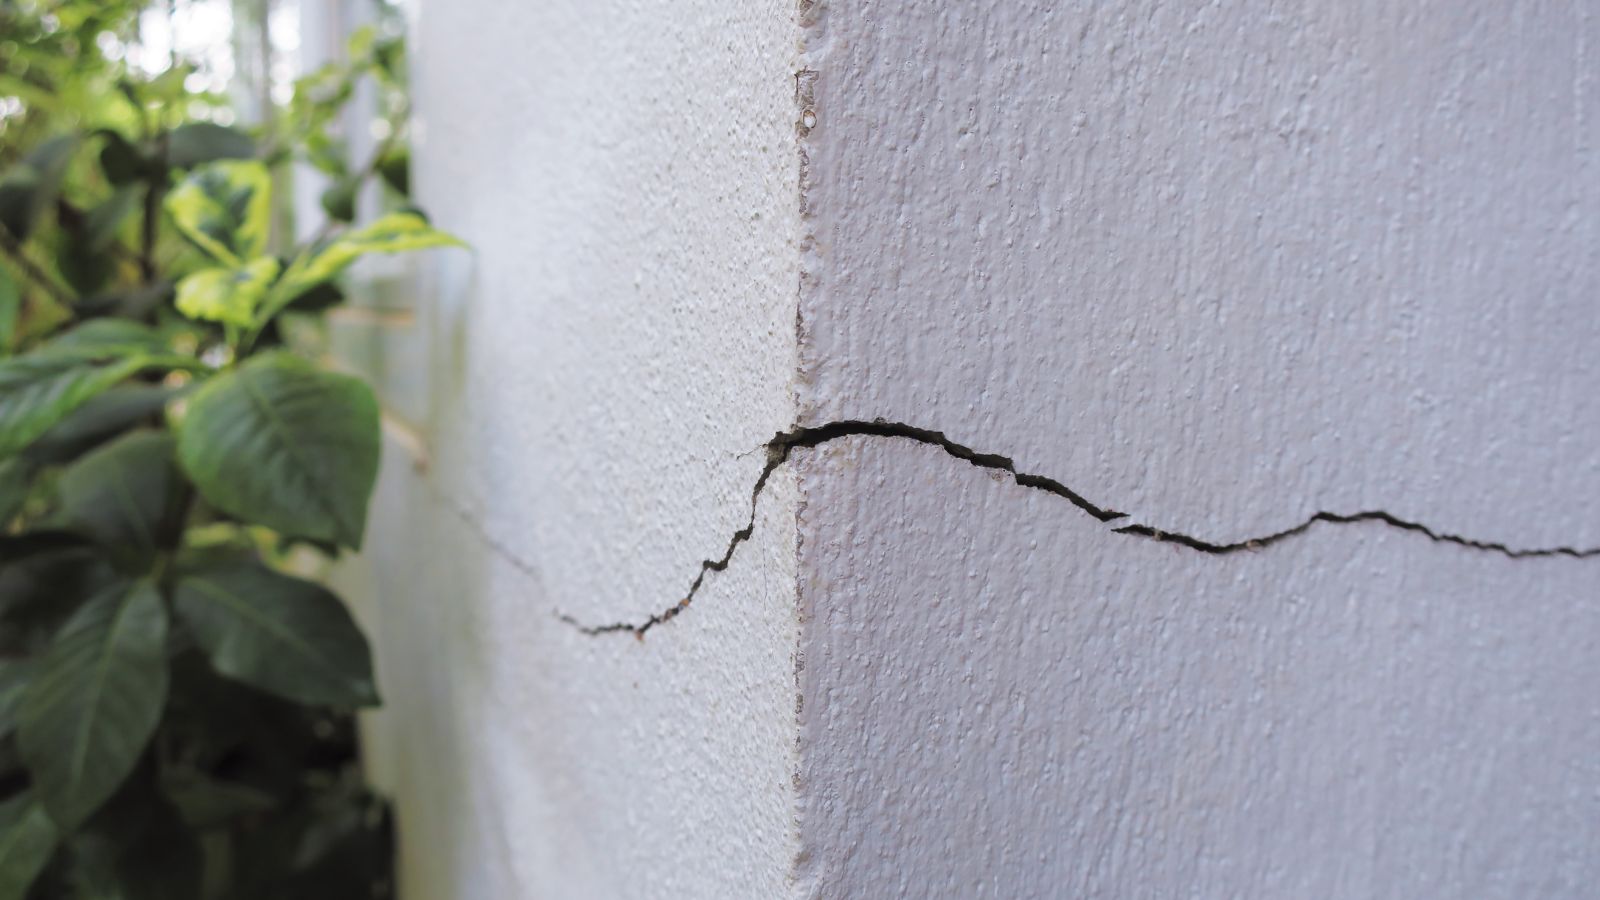 How to fix cracks in plaster walls: in only 4 steps |